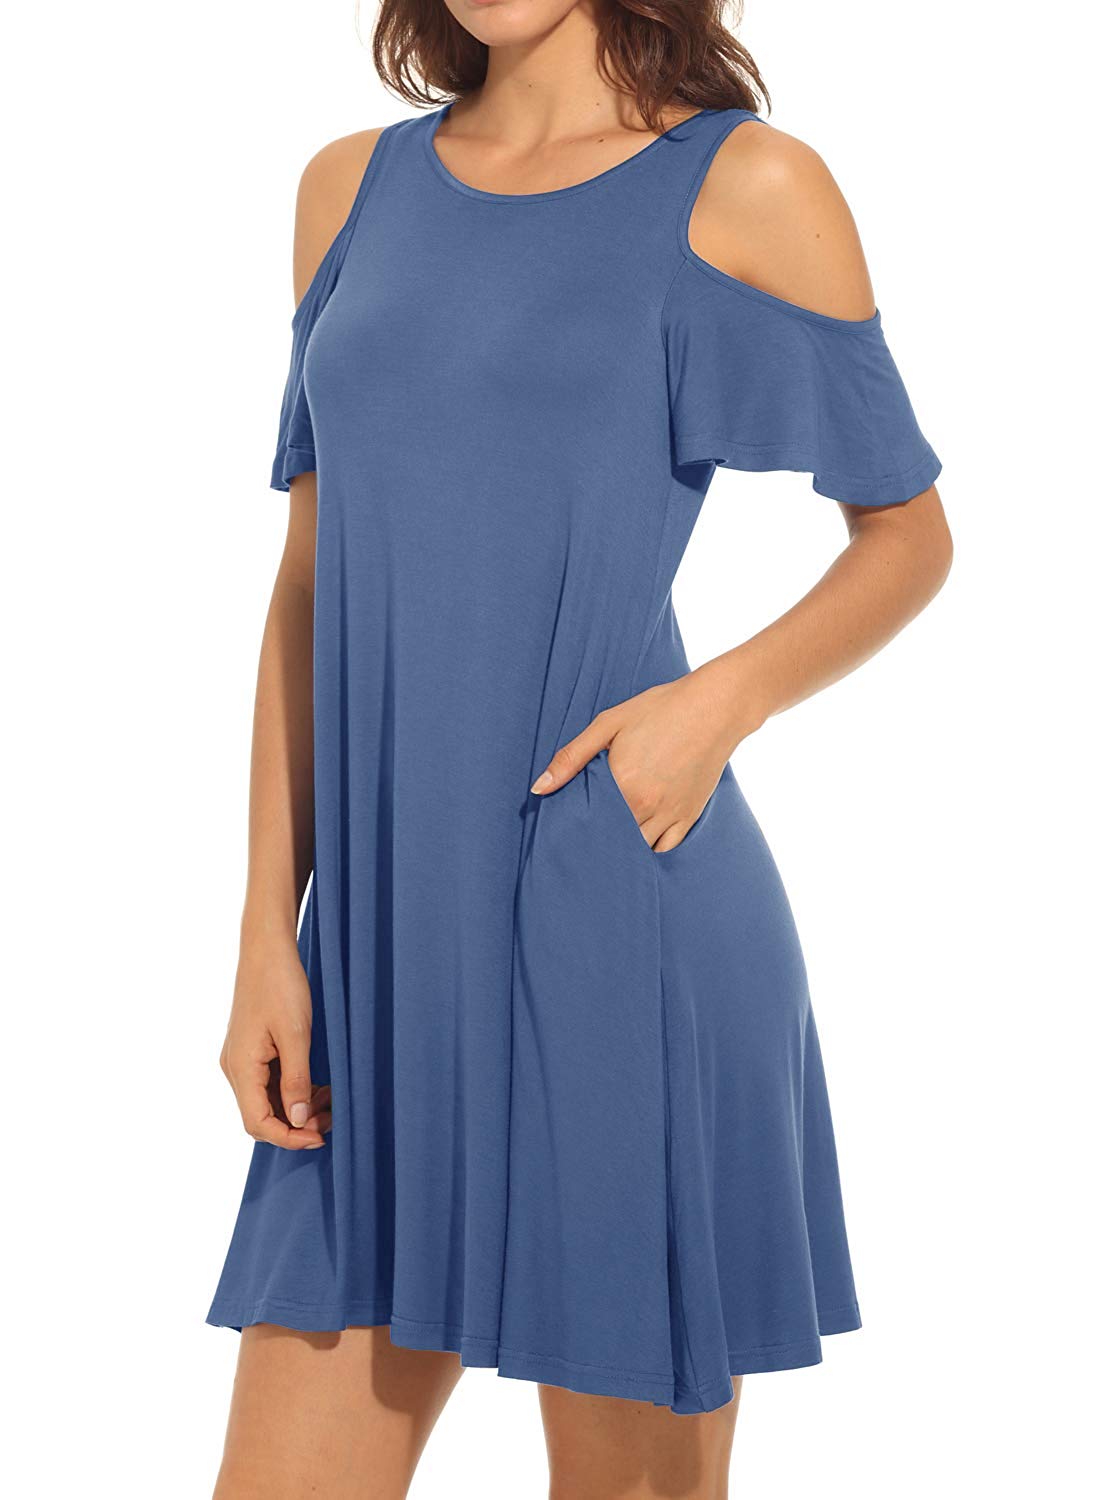 ladies elegant blue outfit - loose fit ruffle sleeve cold shoulder dress